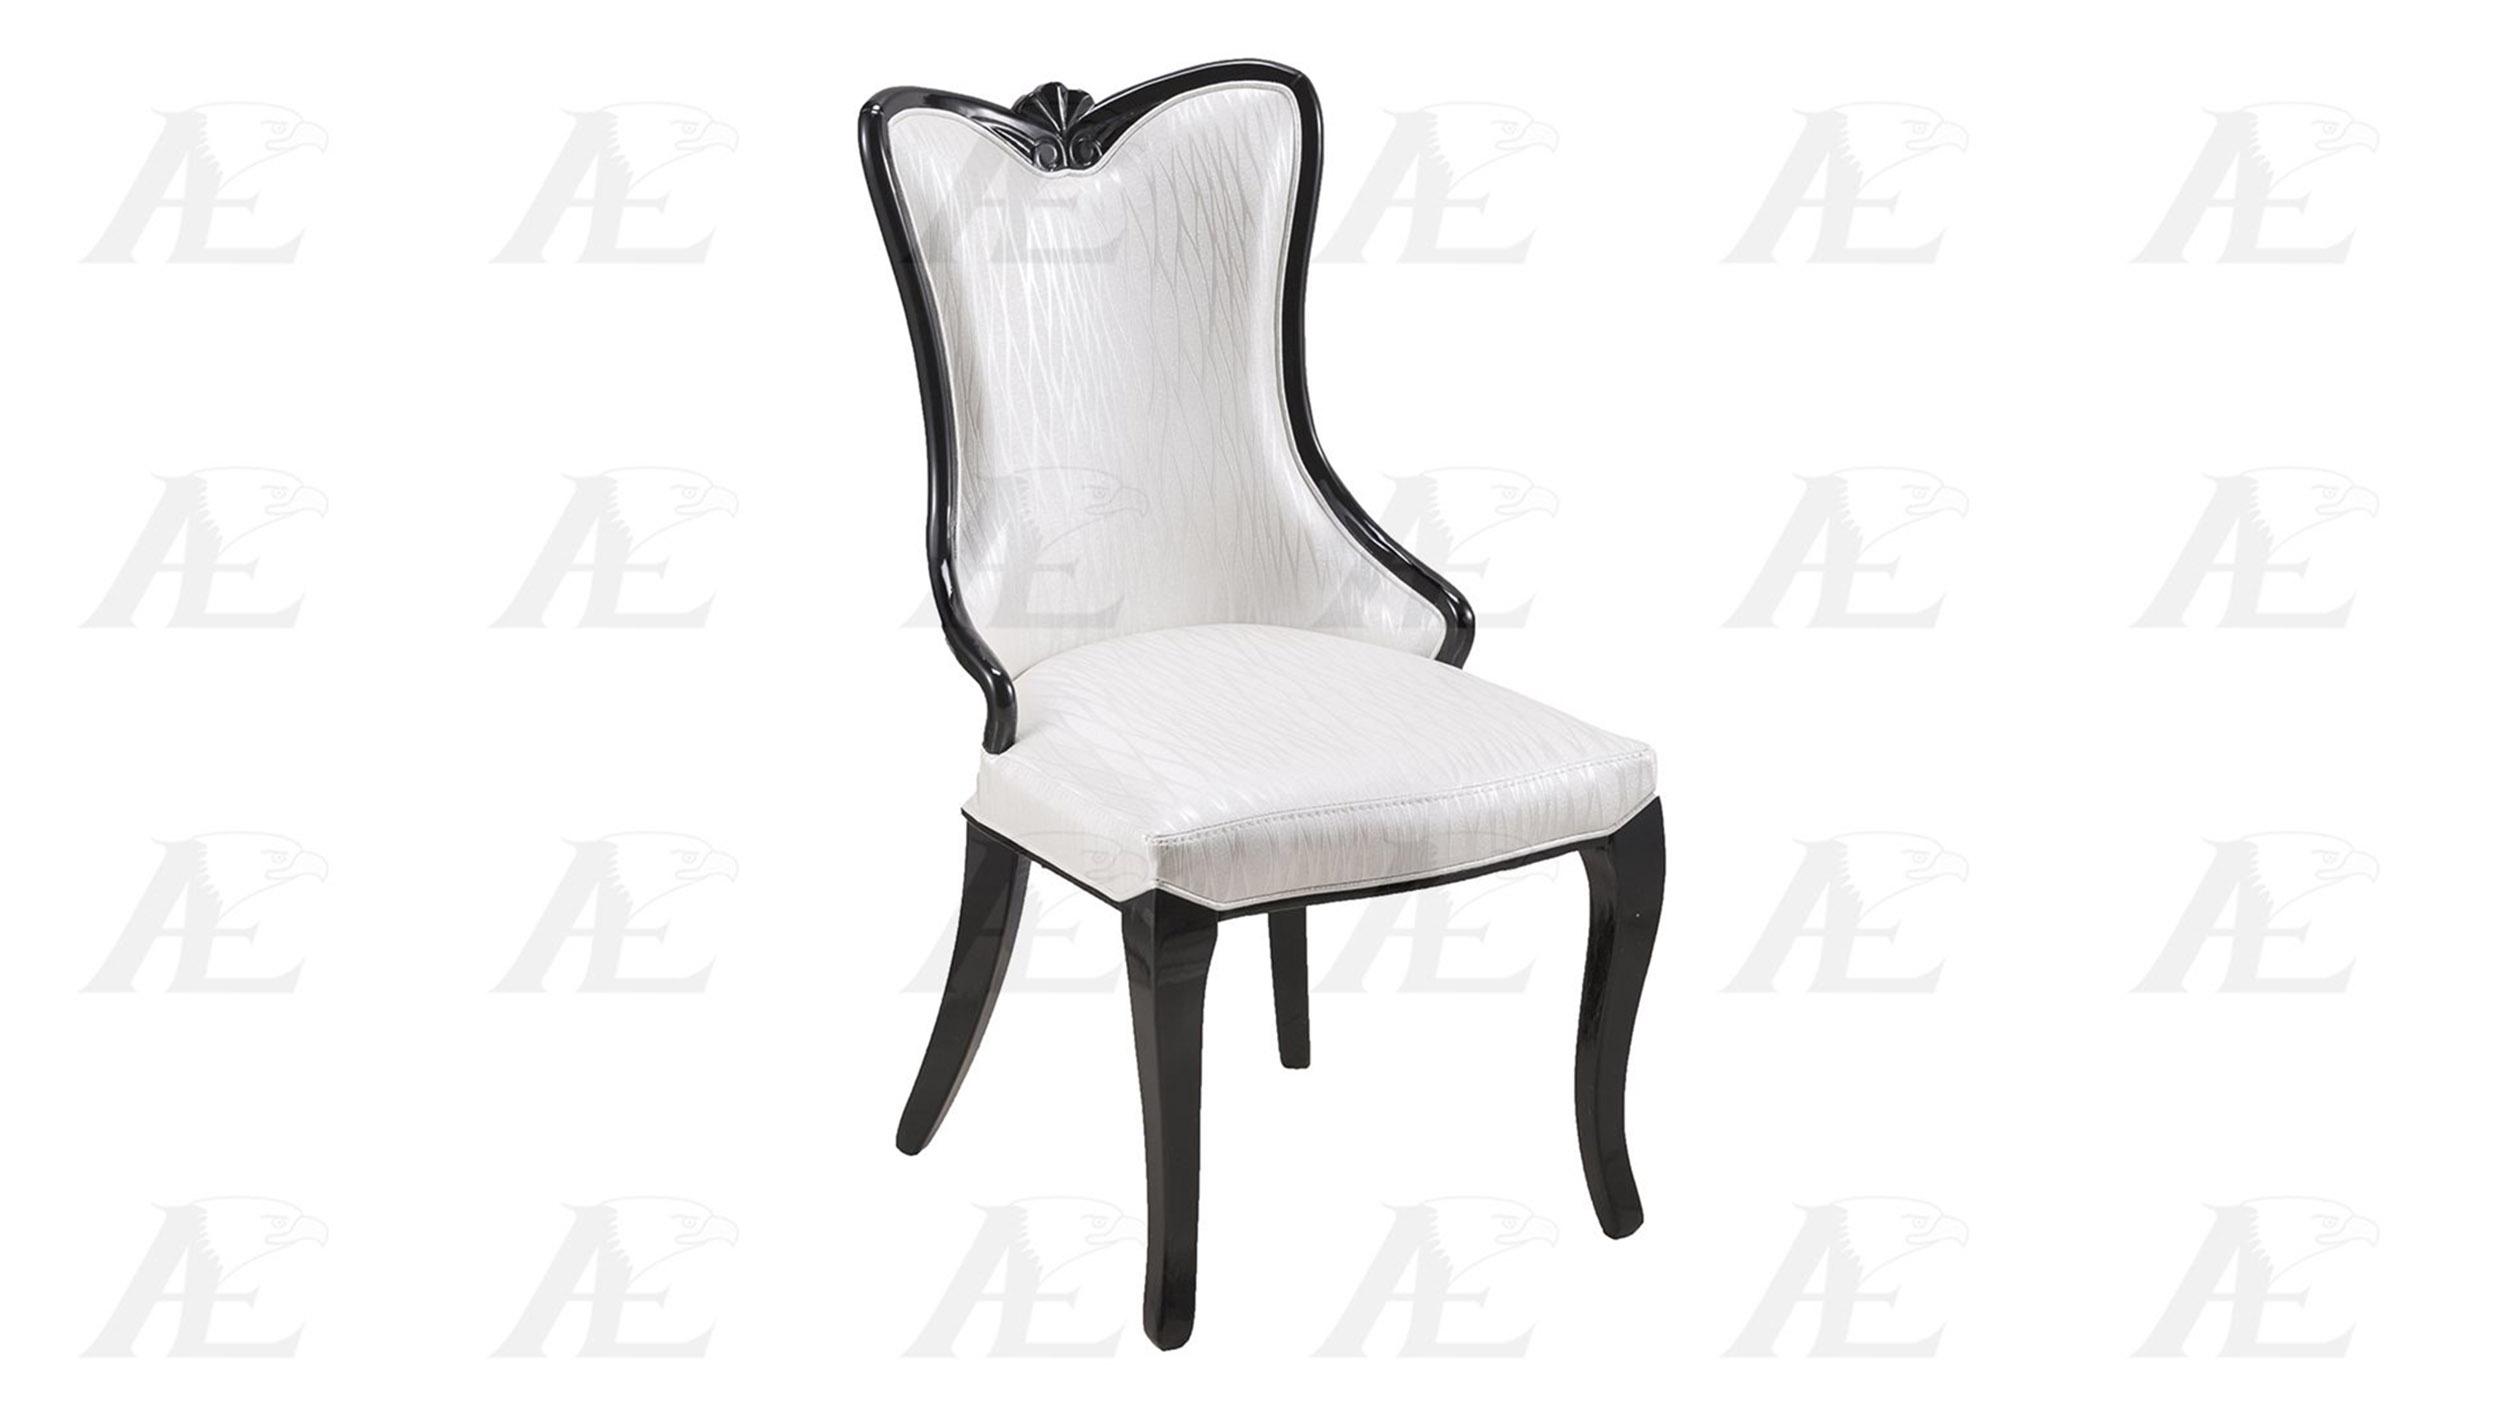 

    
American Eagle Furniture CK-H1336-W Dining Side Chair White CK-H1336-W
